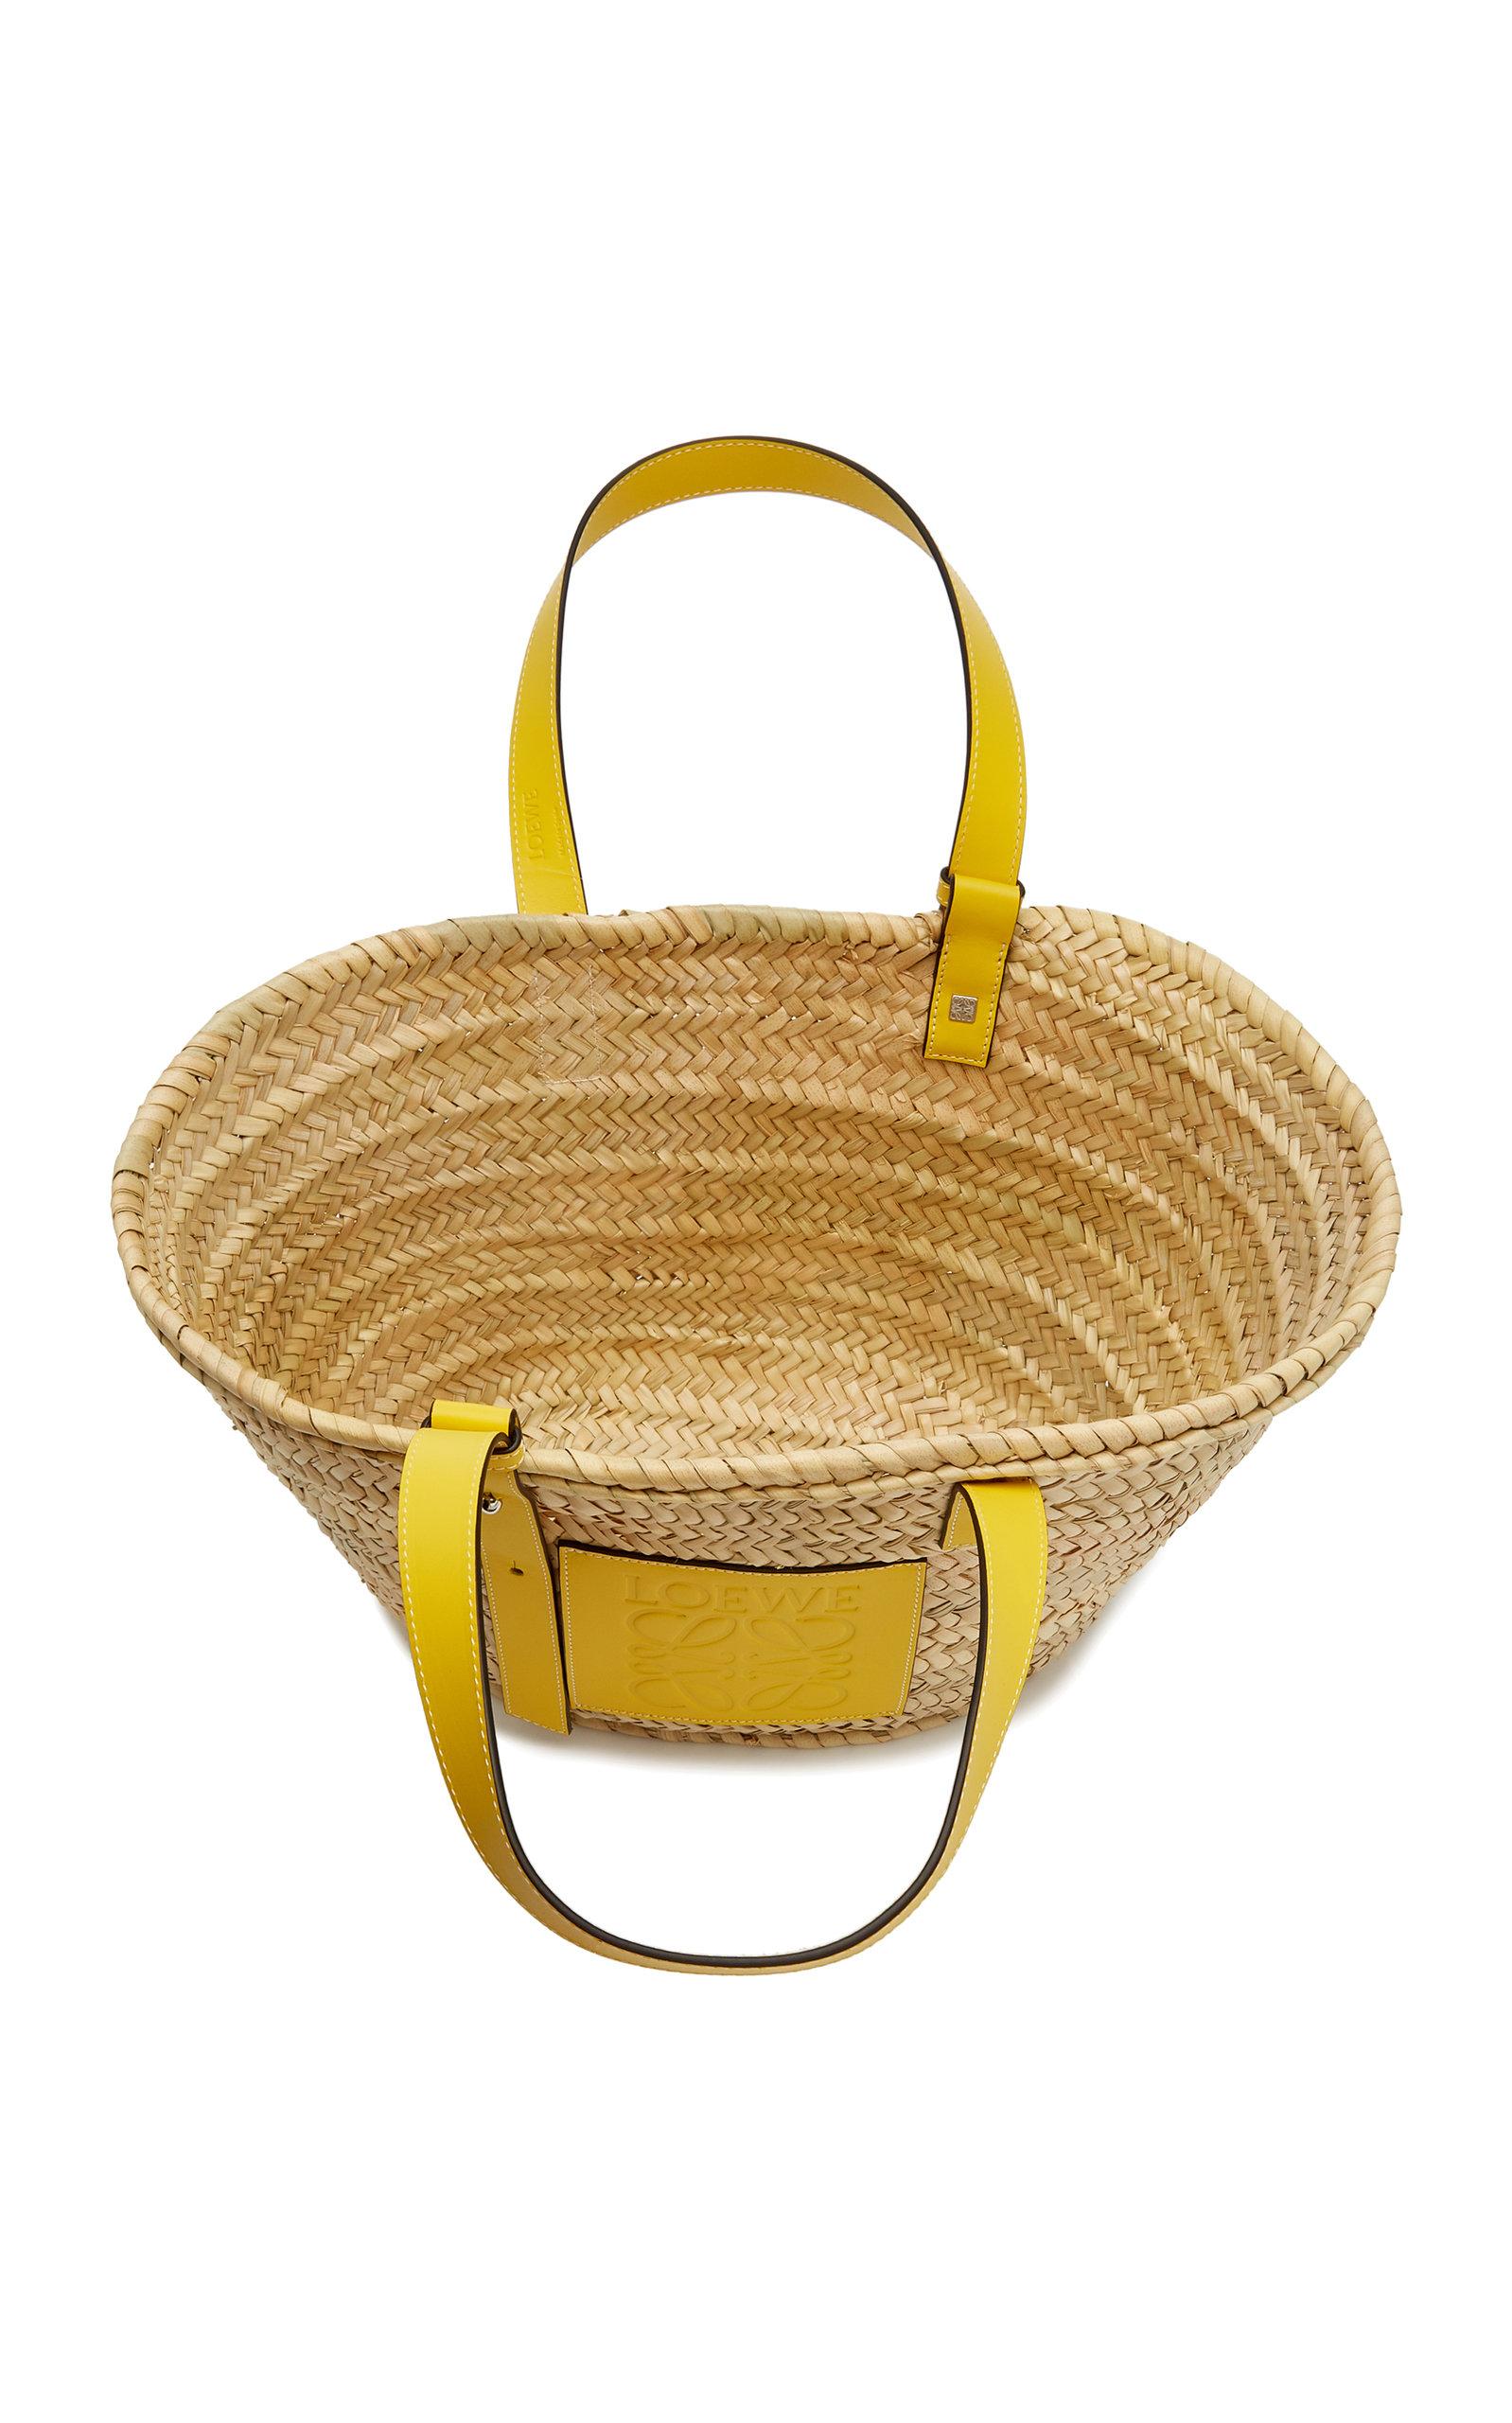 Loewe Small Raffia And Leather Basket Bag in Yellow - Lyst